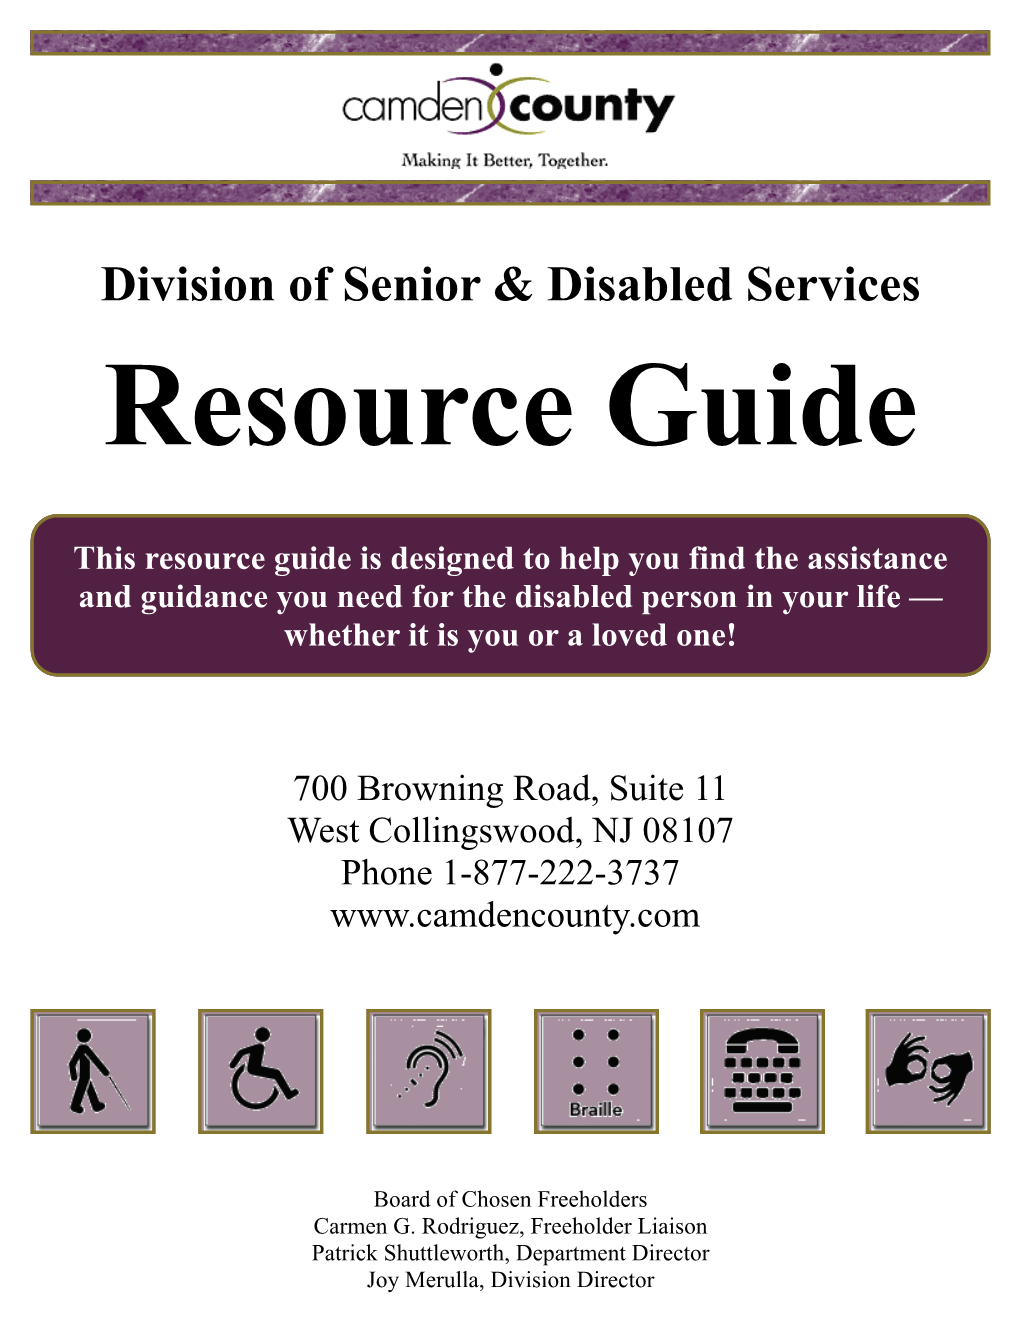 Division of Senior & Disabled Services